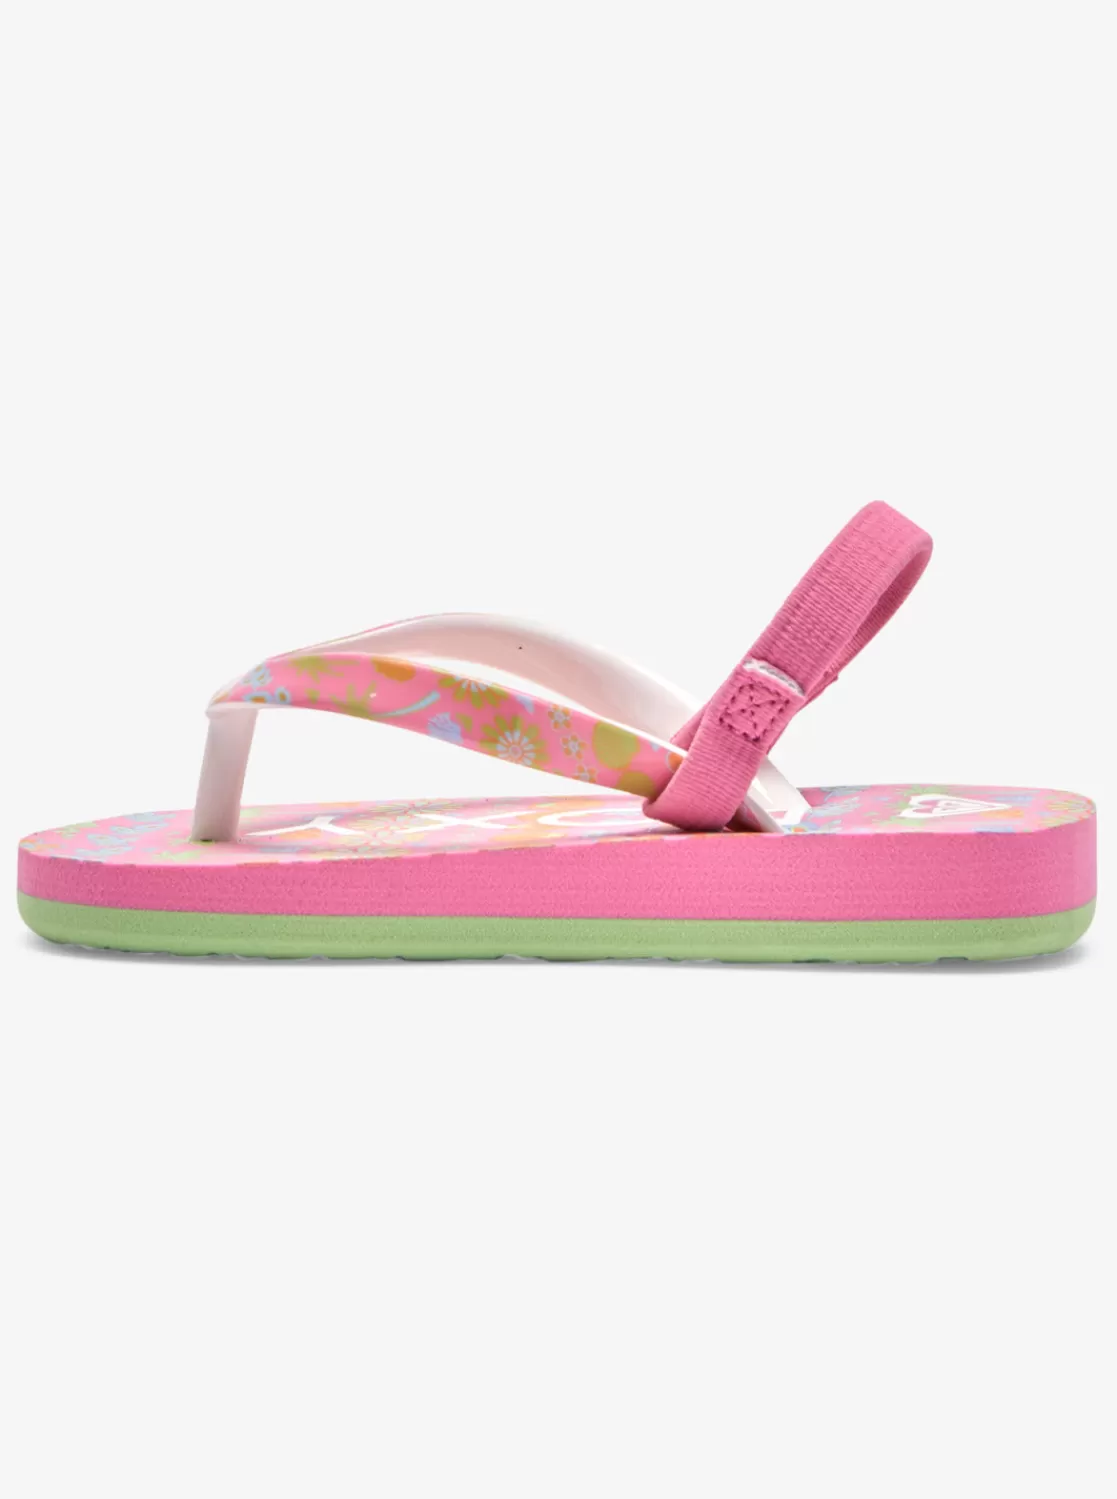 Toddler's Pebbles Sandals-ROXY Hot